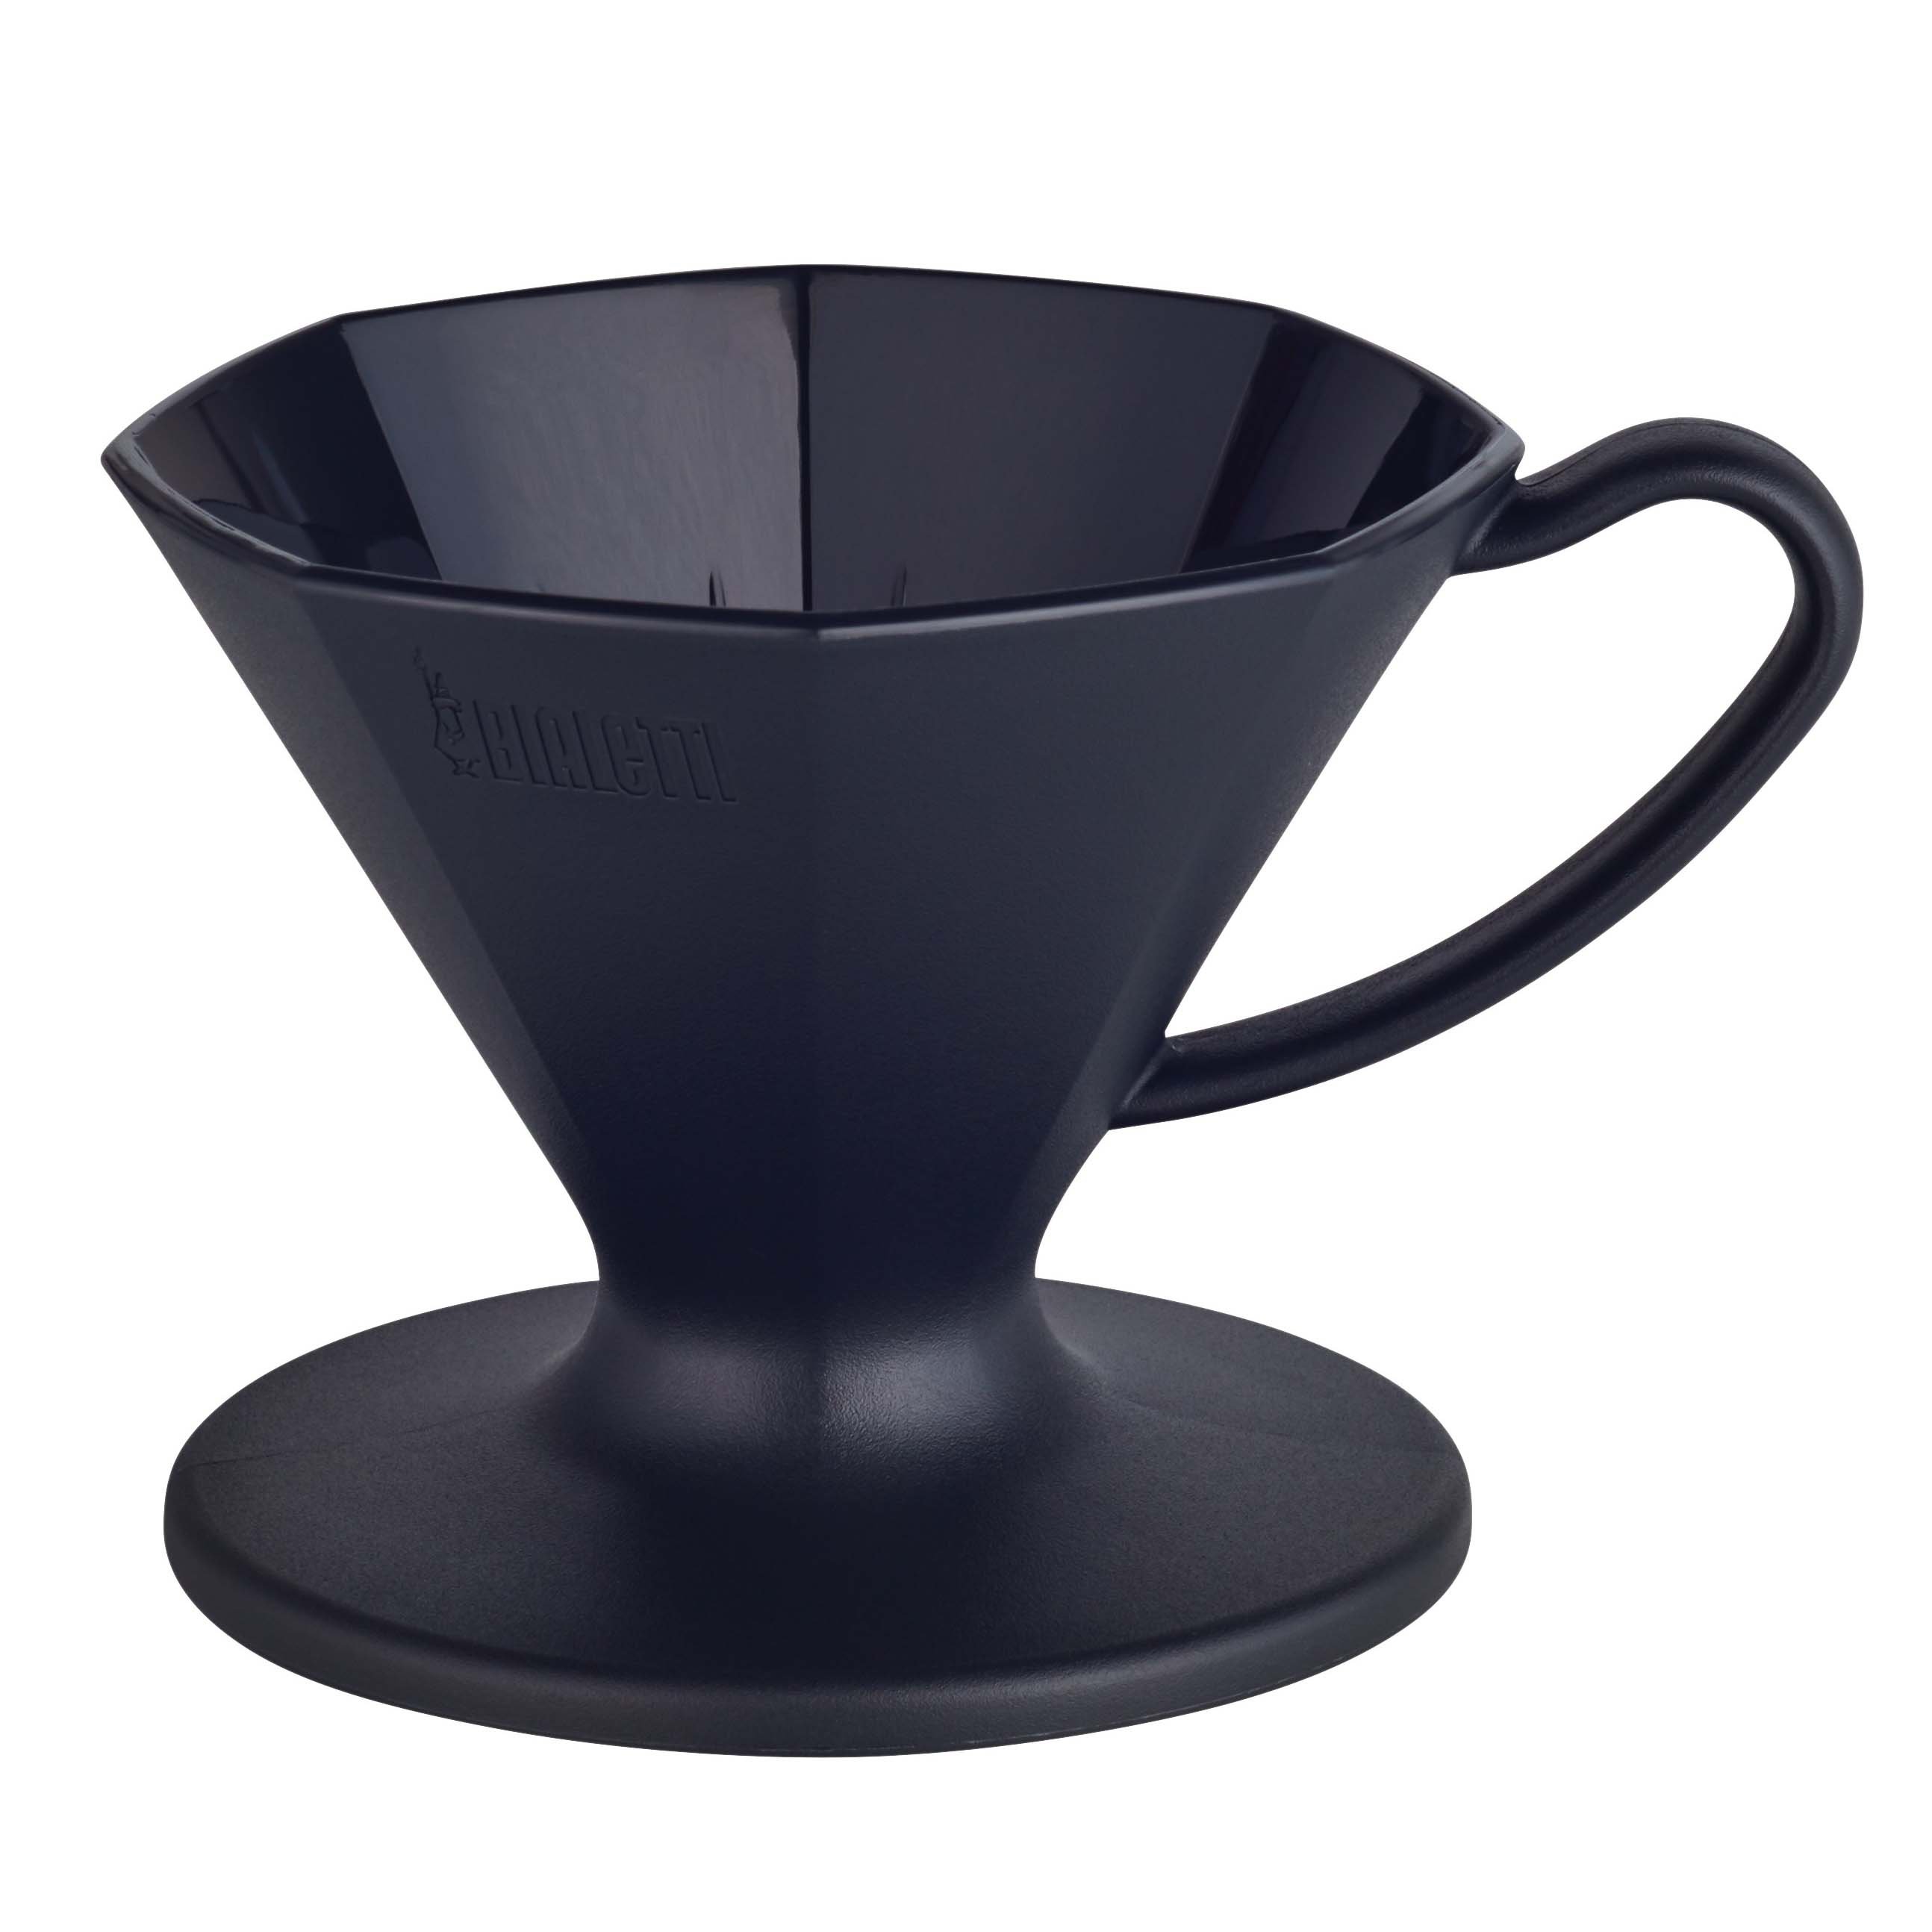 Kitchen & Table by H-E-B Glass Pour-Over Coffee Brewer